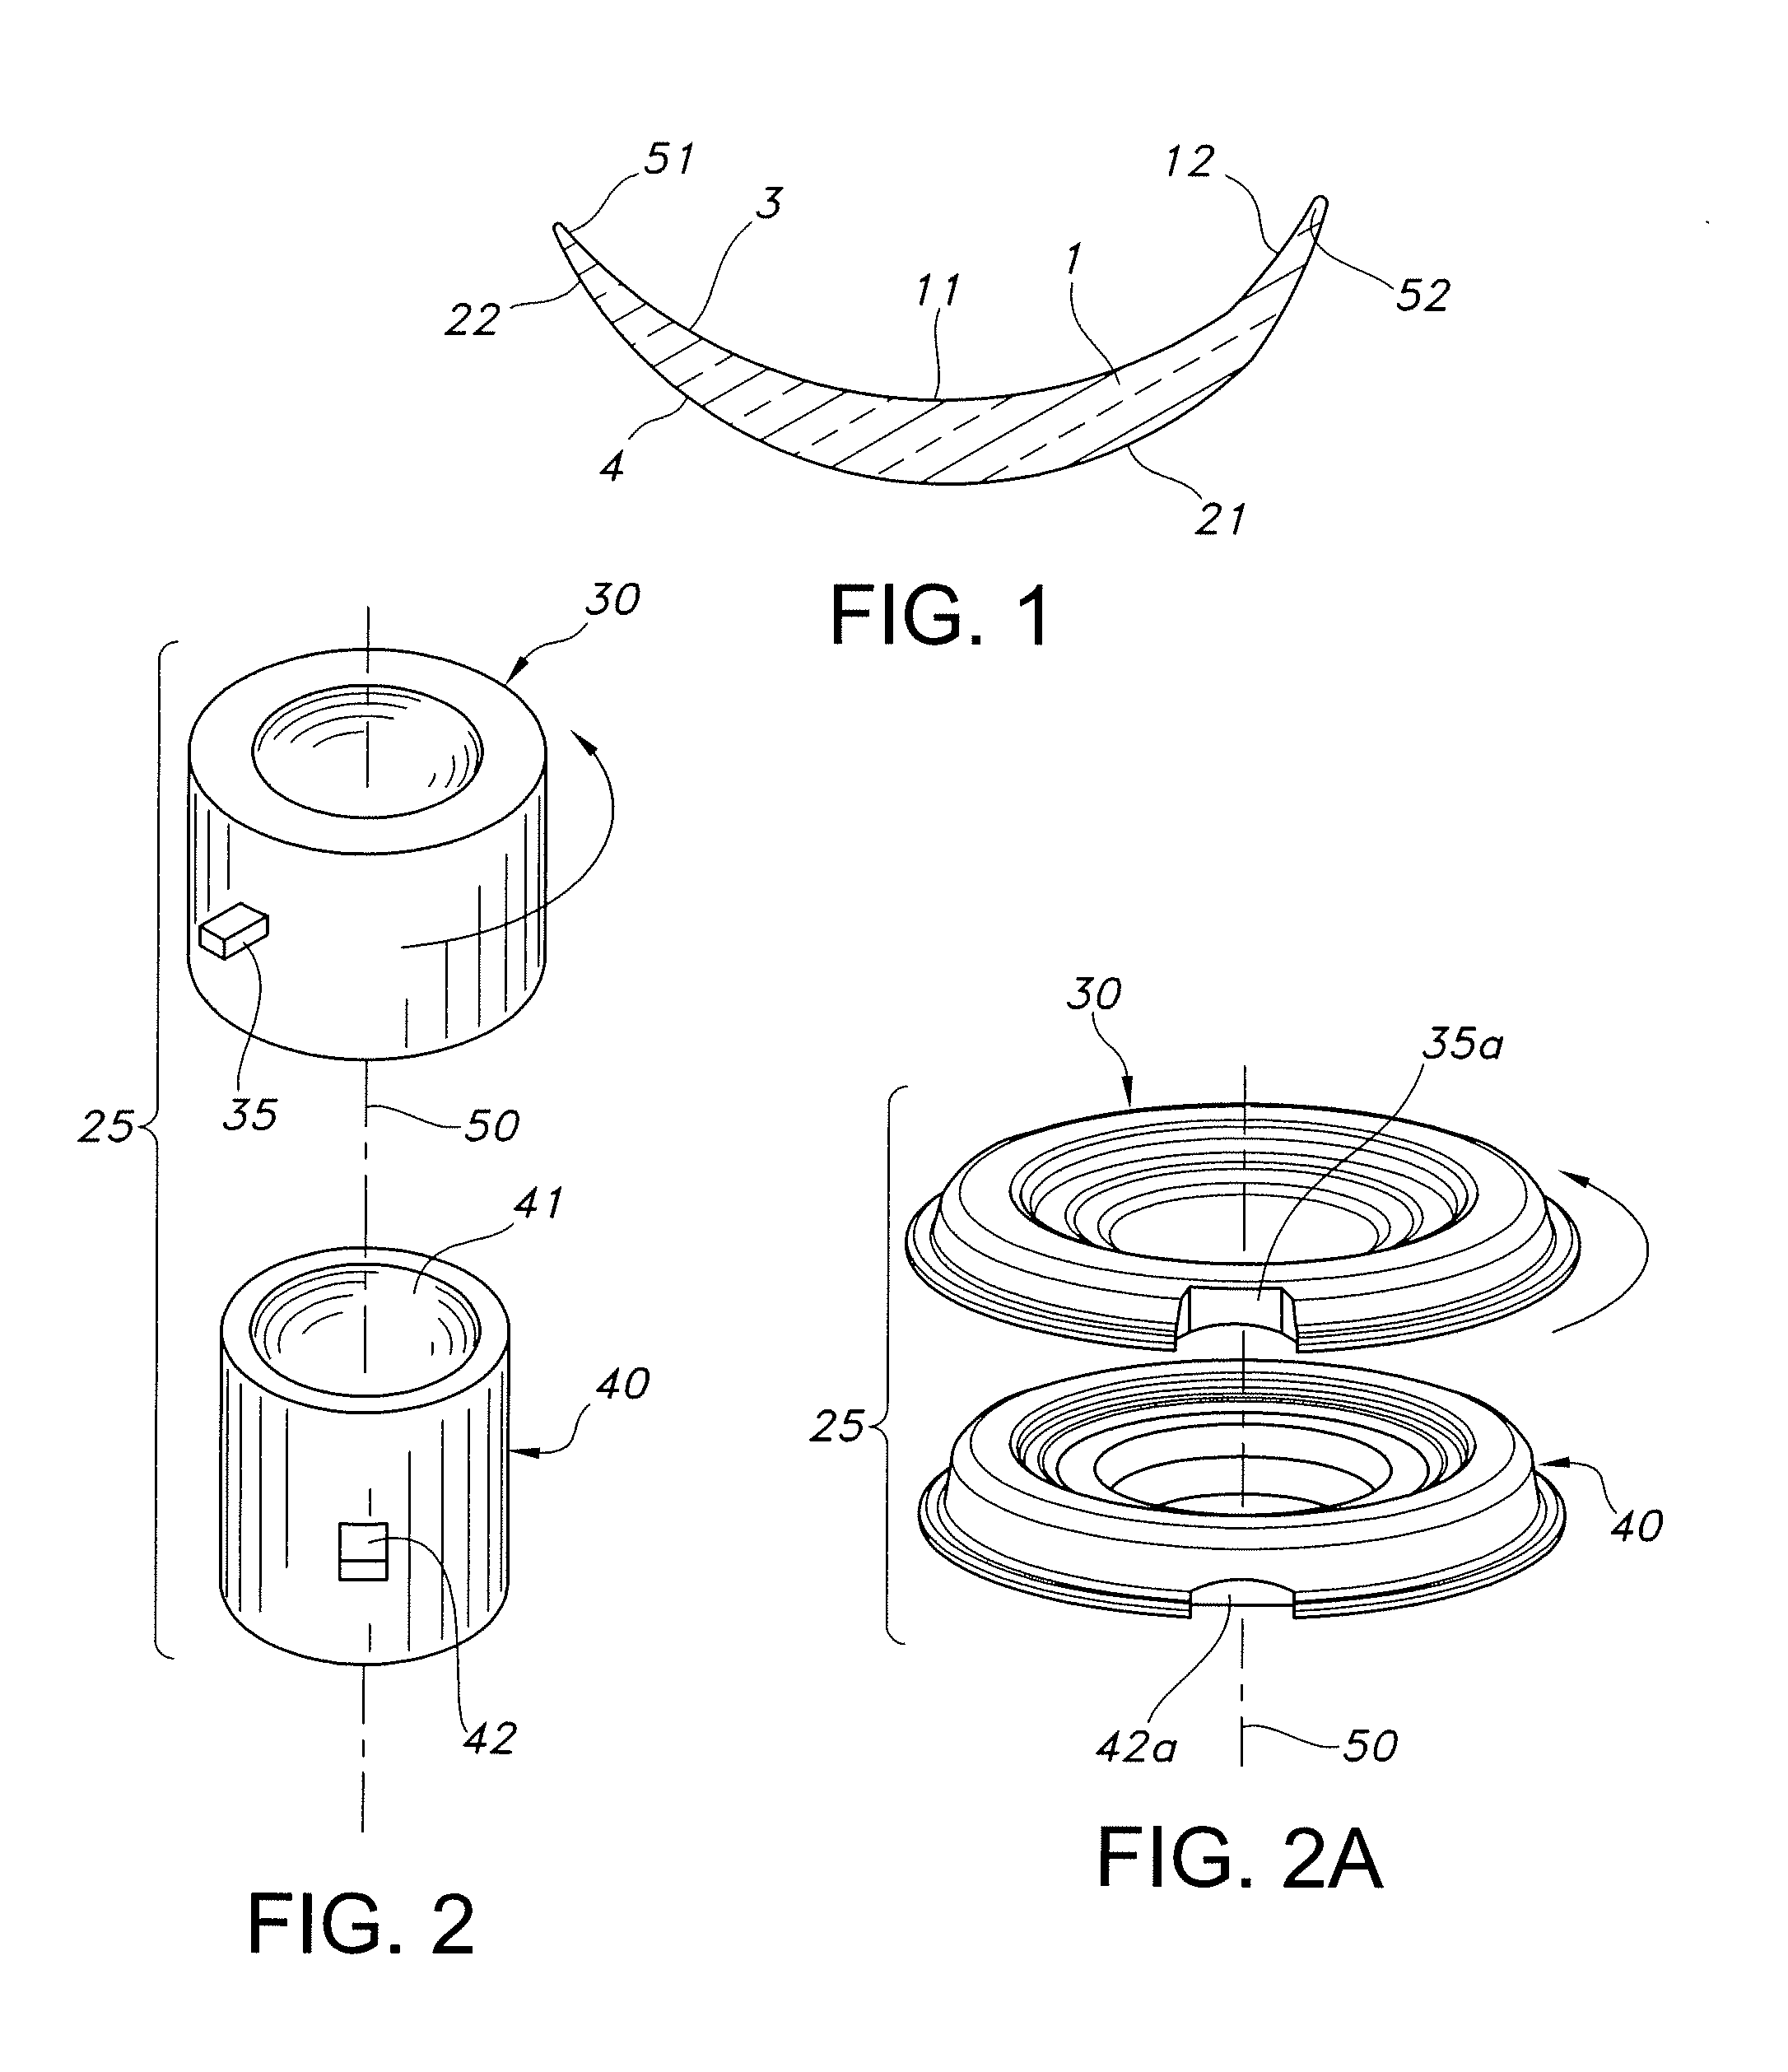 Method and System of Measuring Toric Lens Axis Angle